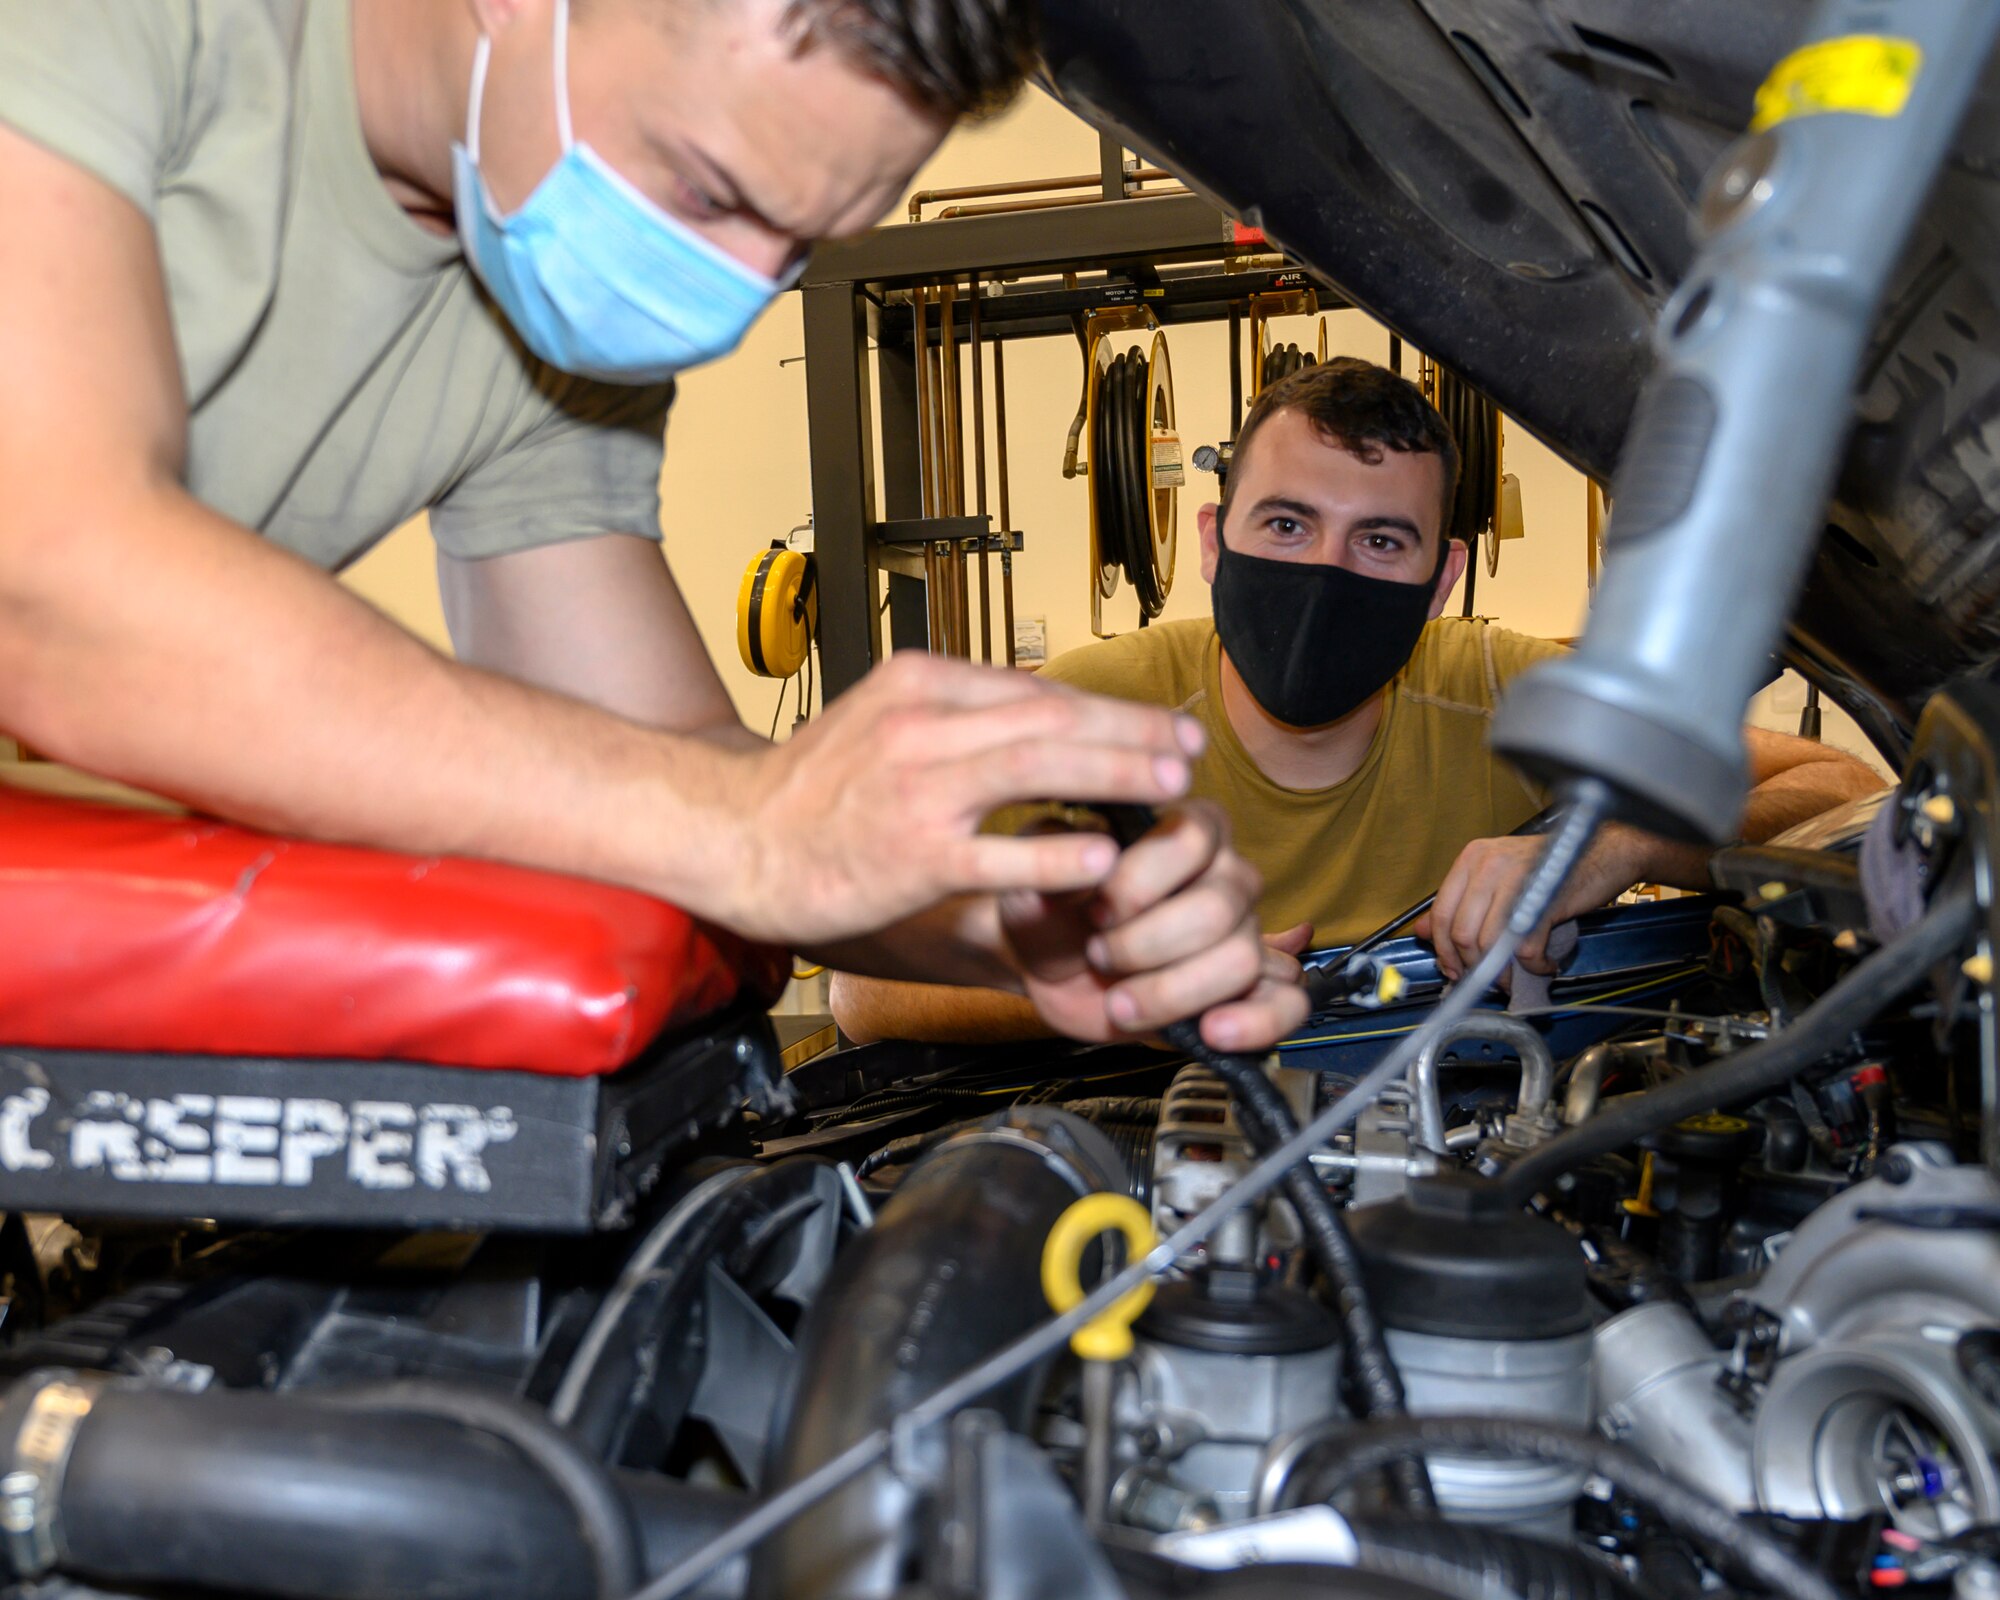 Two Airmen conduct routine vehicle maintenance in a engine bay of a vehicle.